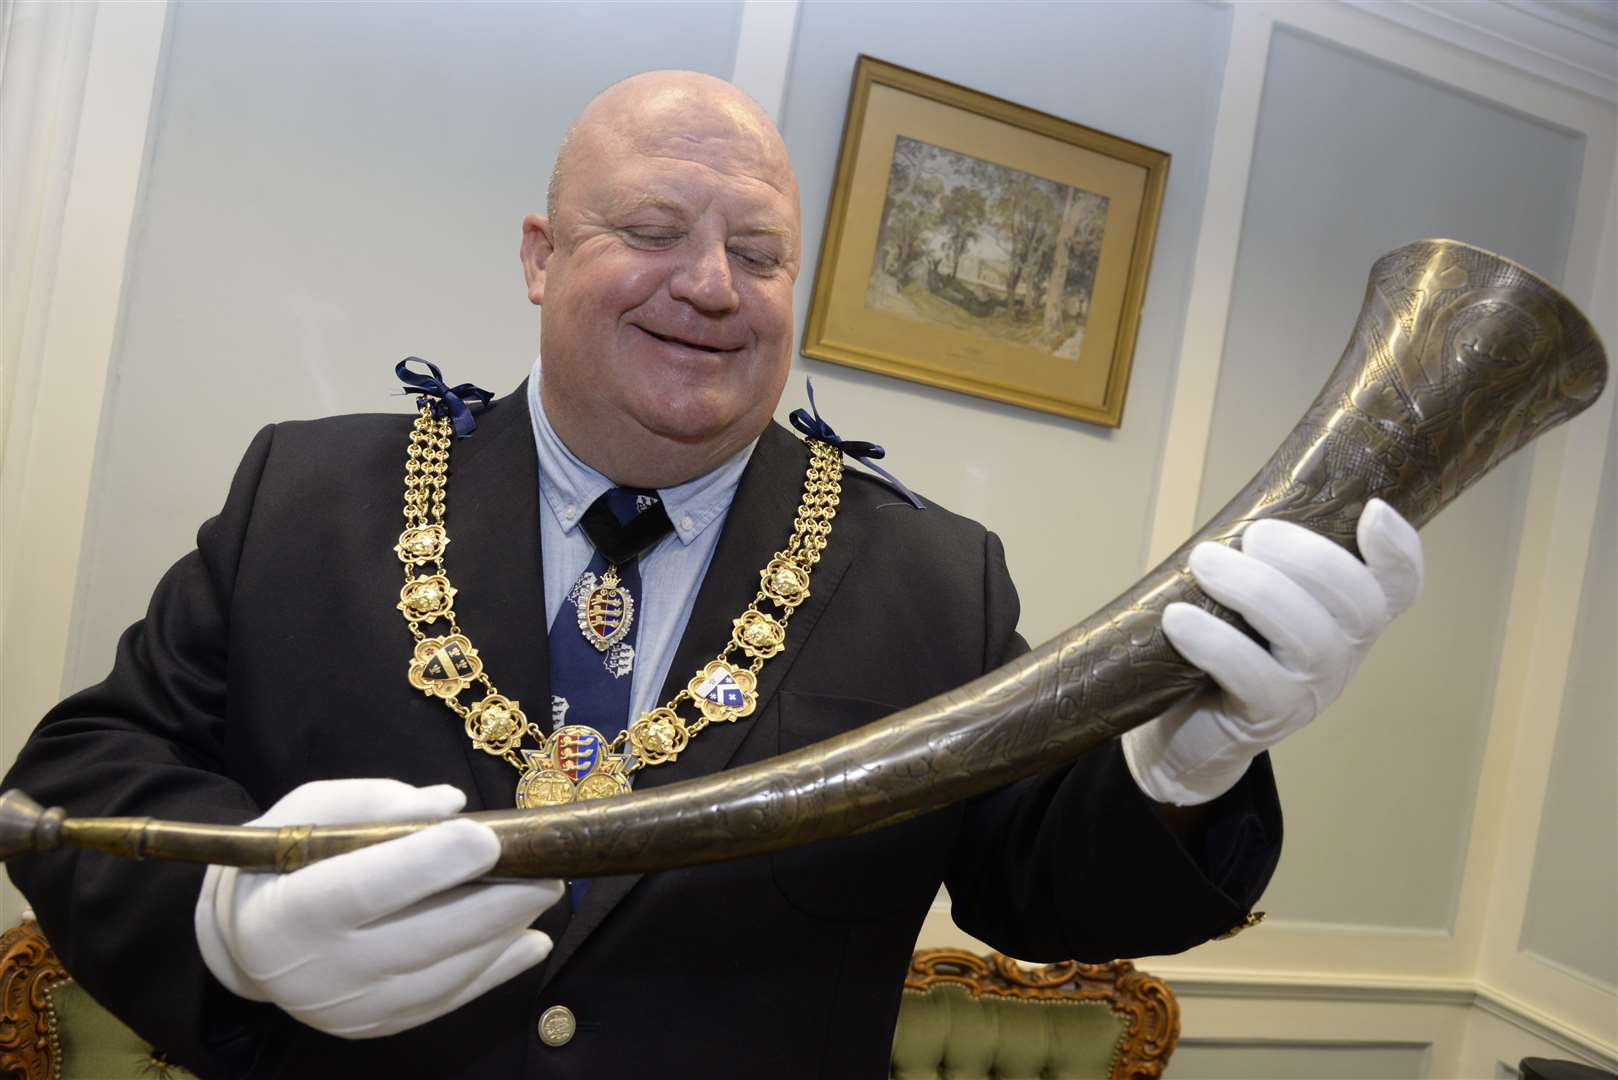 Mayor of Dover Cllr Neil Rix with the Burghmote Horn which has been returned after it was stolen in the 1960's